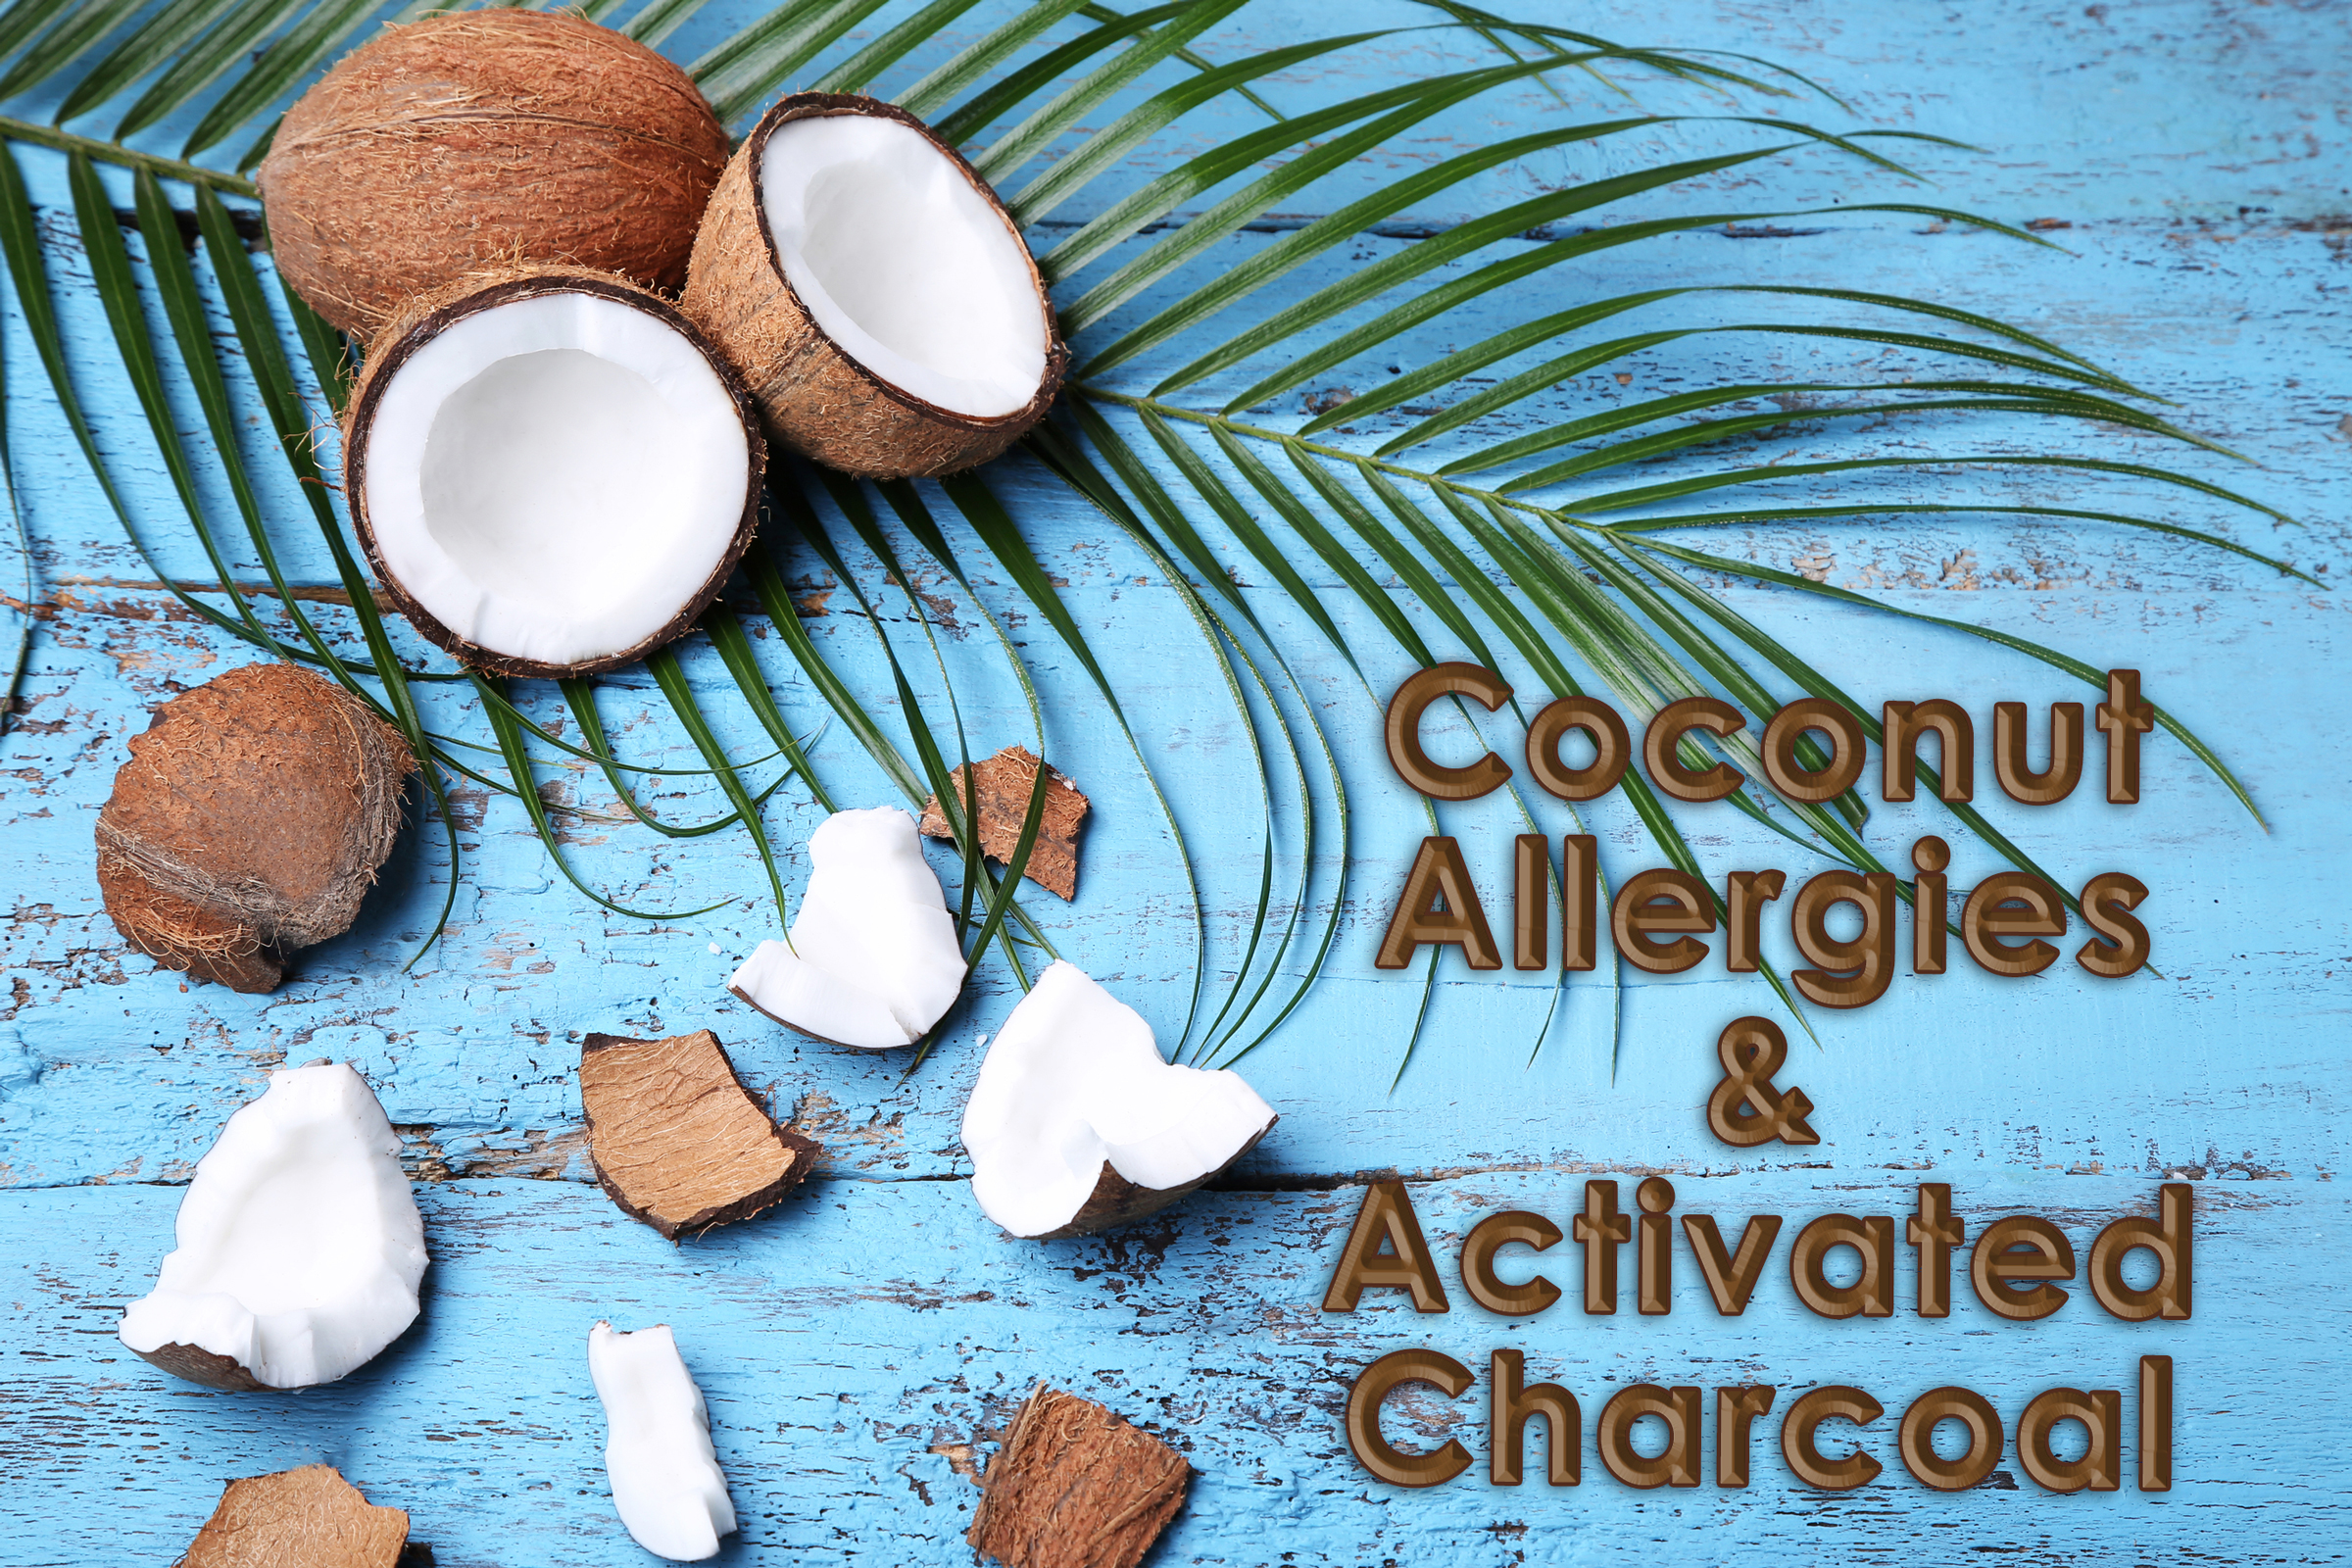 coconut allergy draft1 - Coconut Allergies and Activated Charcoal